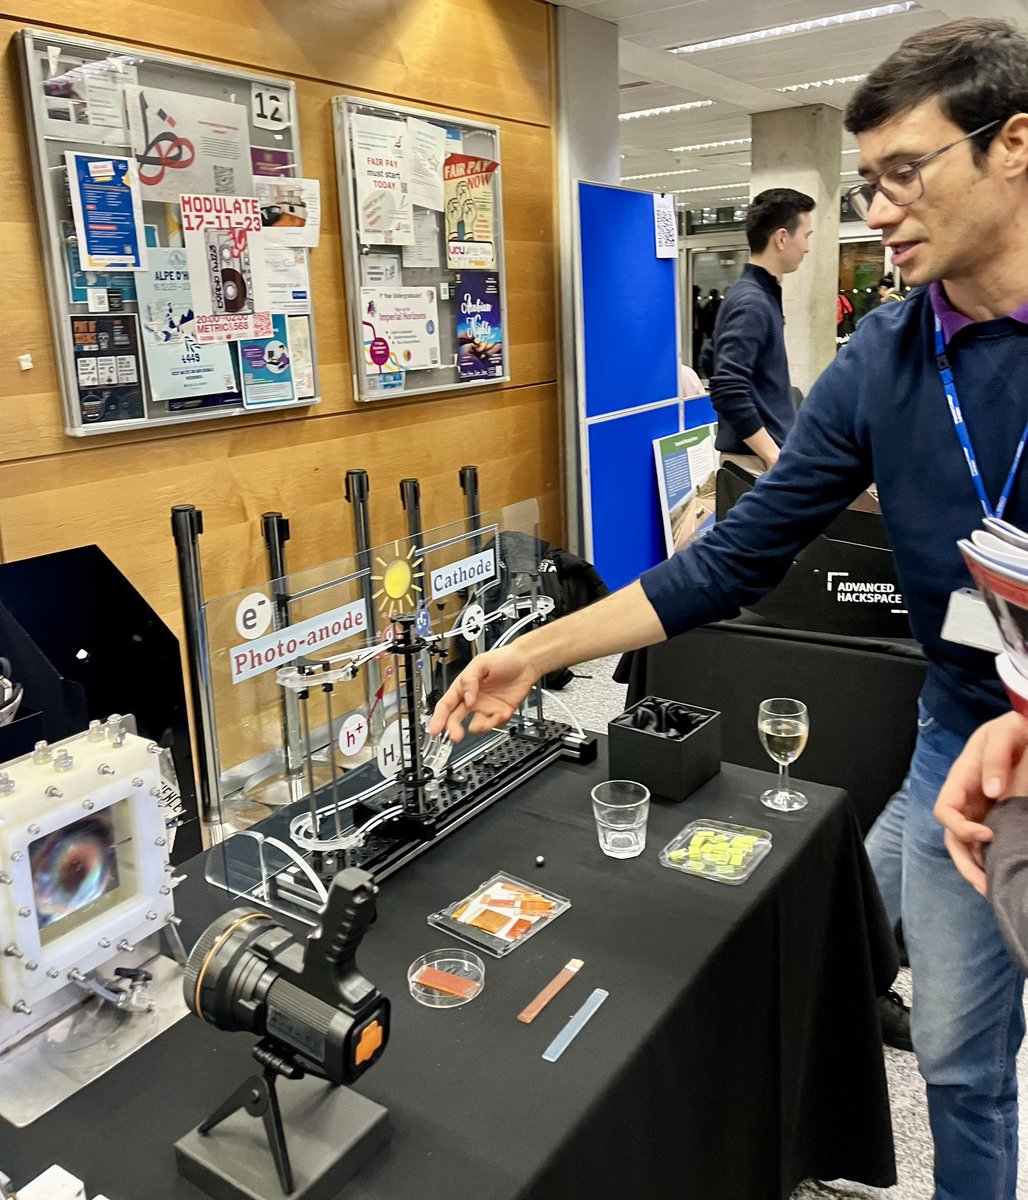 We are thrilled to be showcasing our work with @CoatingsSolar in ☀️ #Solar #EnergyResearch at the Energy Research Showcase today @EnergyFuturesIC . It’s so great to have feedback from visitors to our stall and to have useful discussions about reactor prototyping in the UK